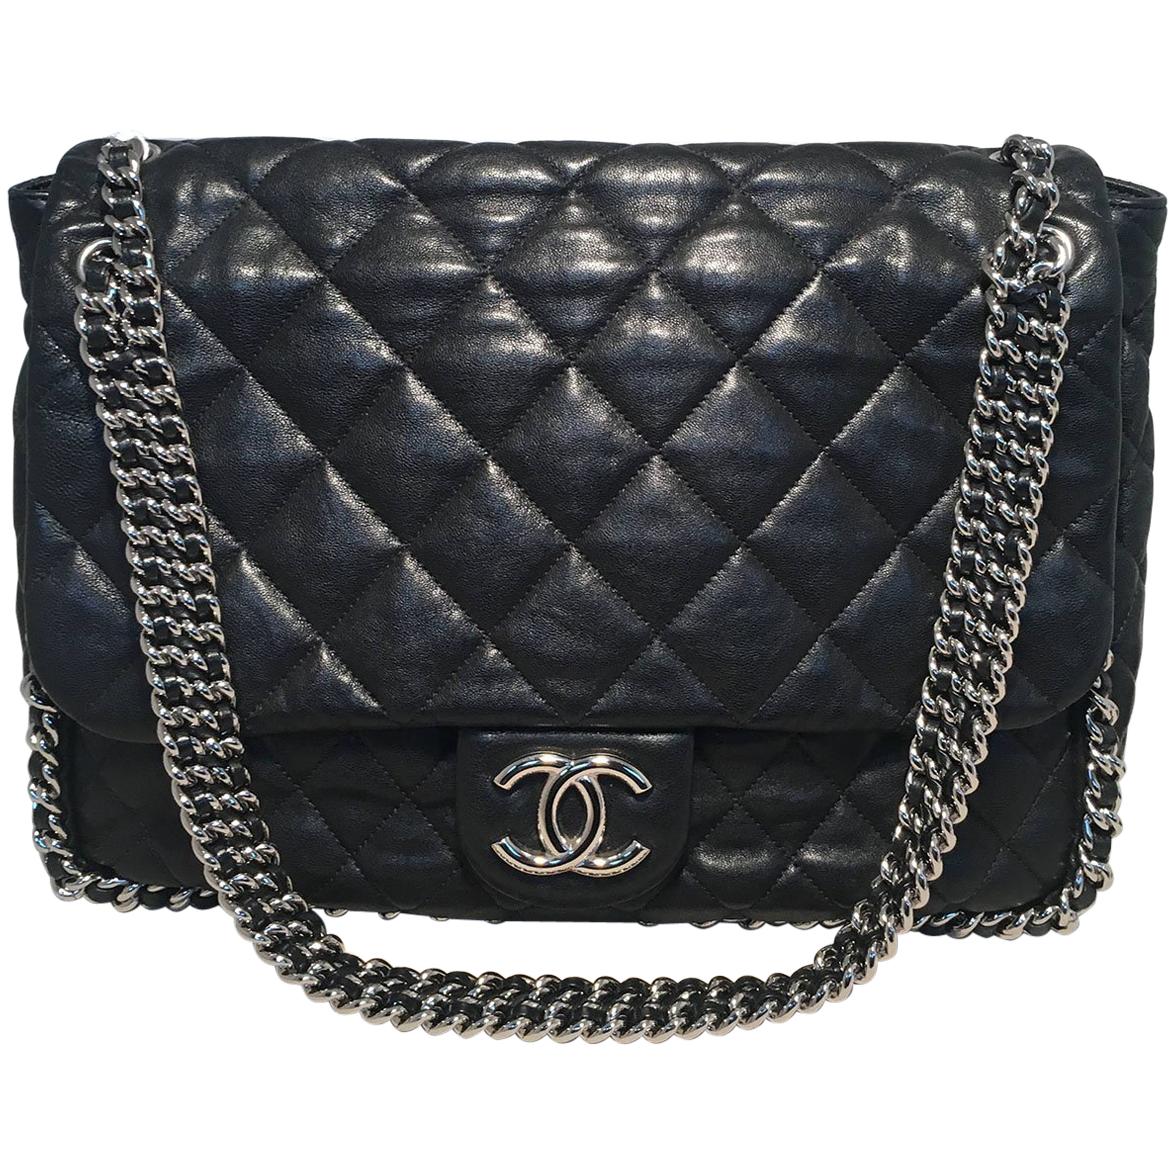 Chanel Black Quilted Leather Chain Trim Classic Maxi Flap Shoulder Bag